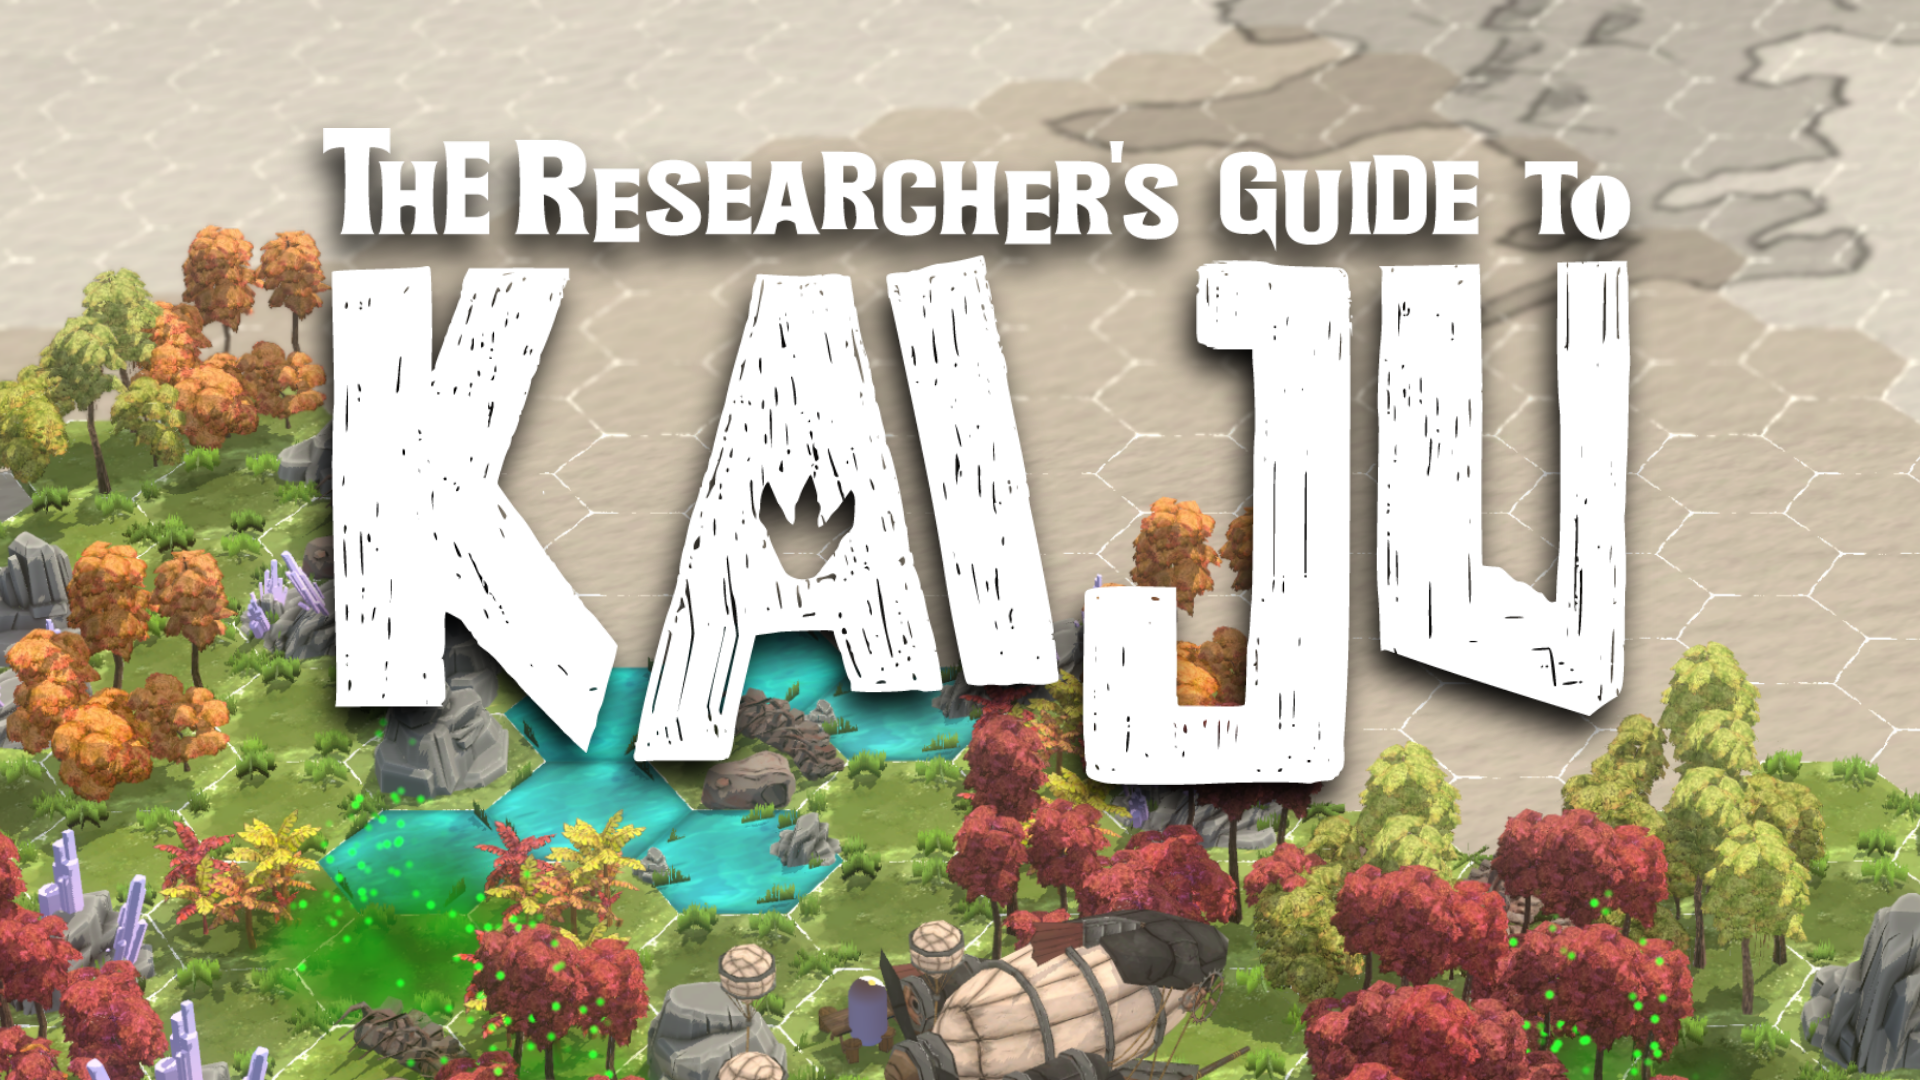 The Researcher's Guide to Kaiju